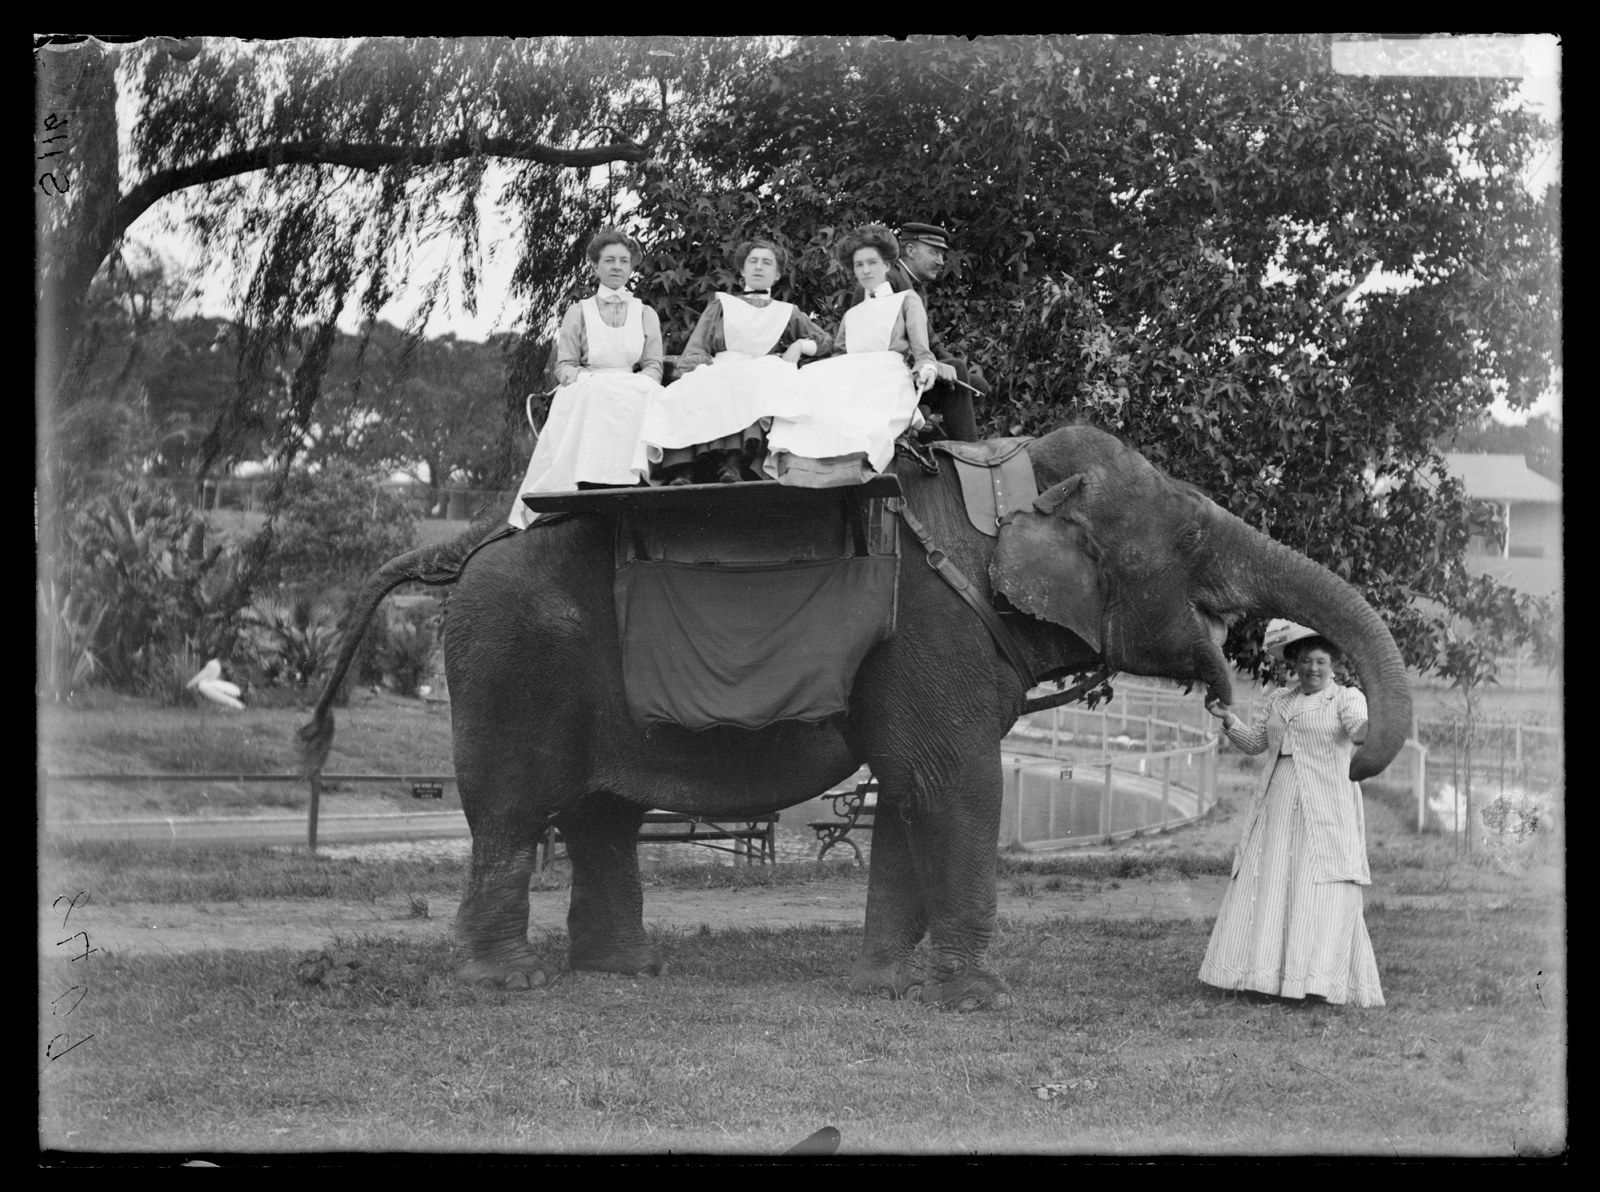 Three women sit on top of an elephant at Moore Park Zoological Gardens